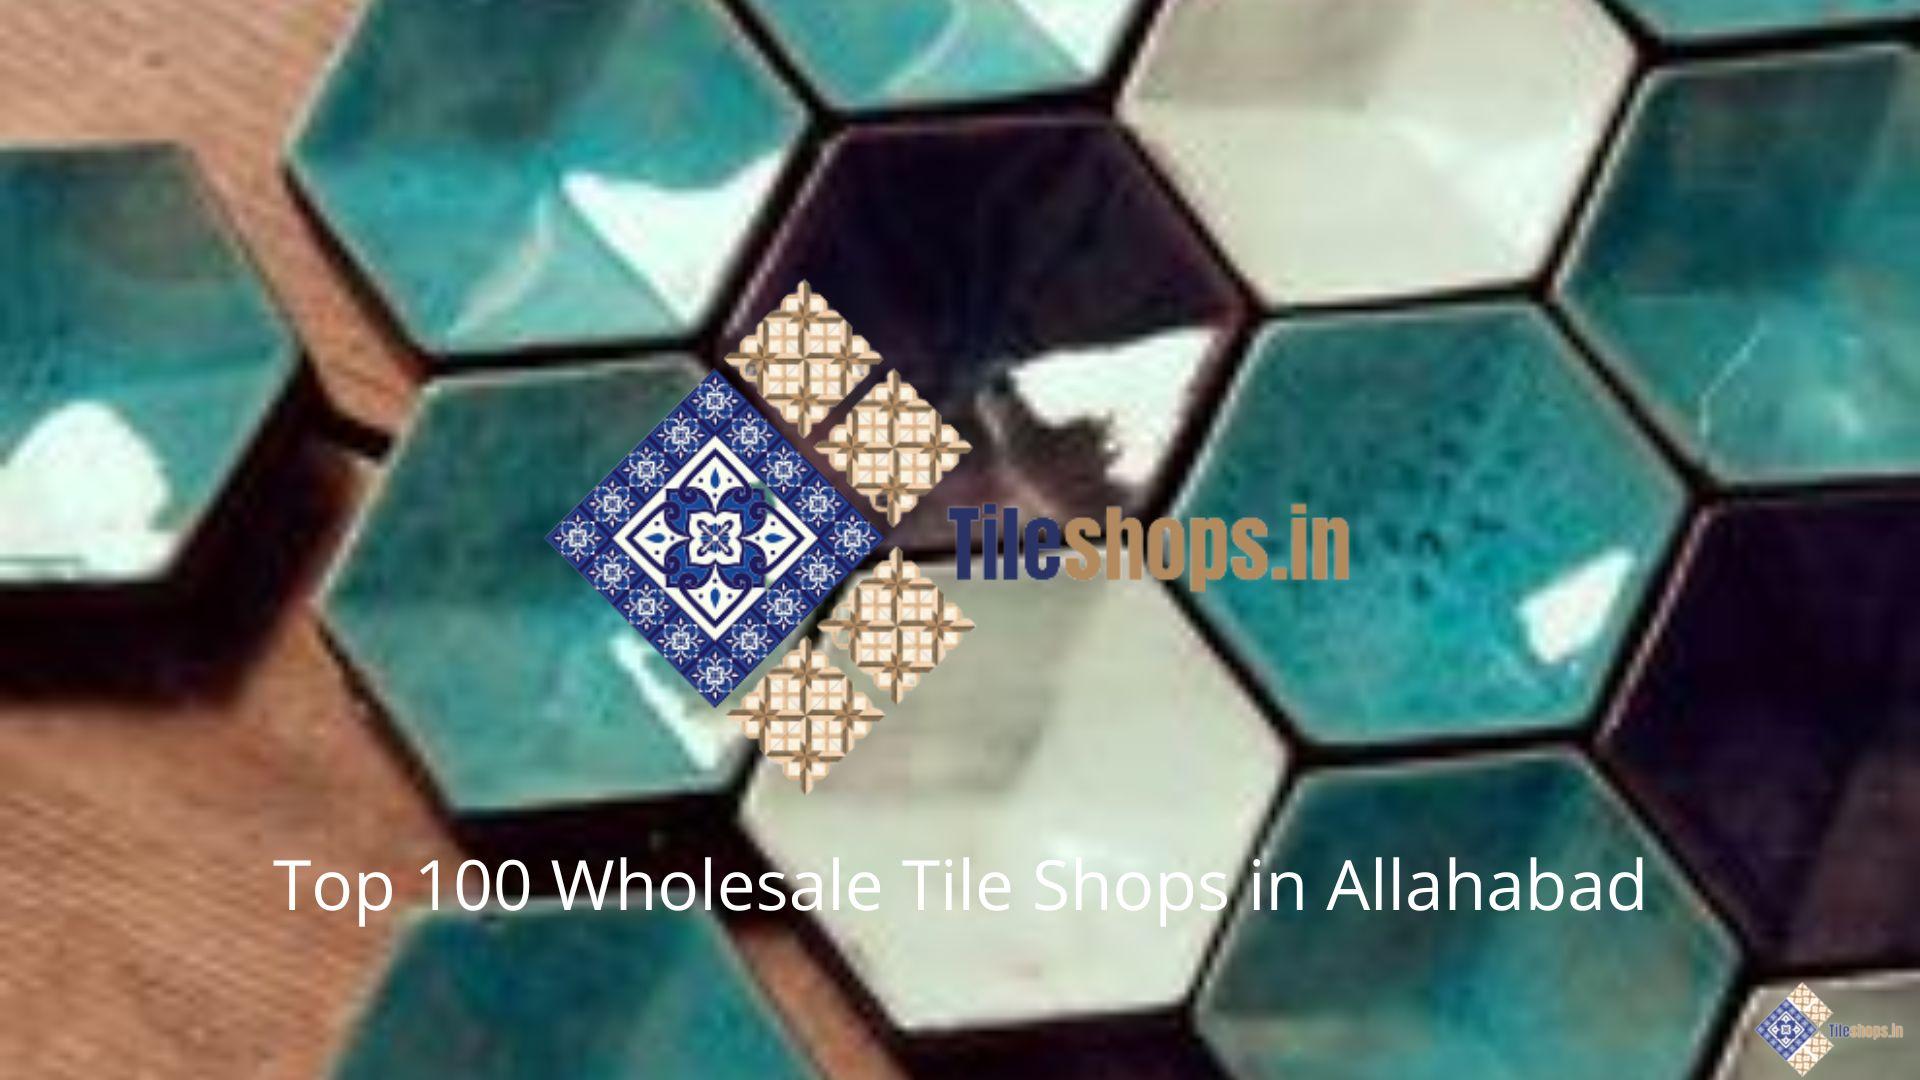 Top 100 Wholesale Tile Shops in Allahabad